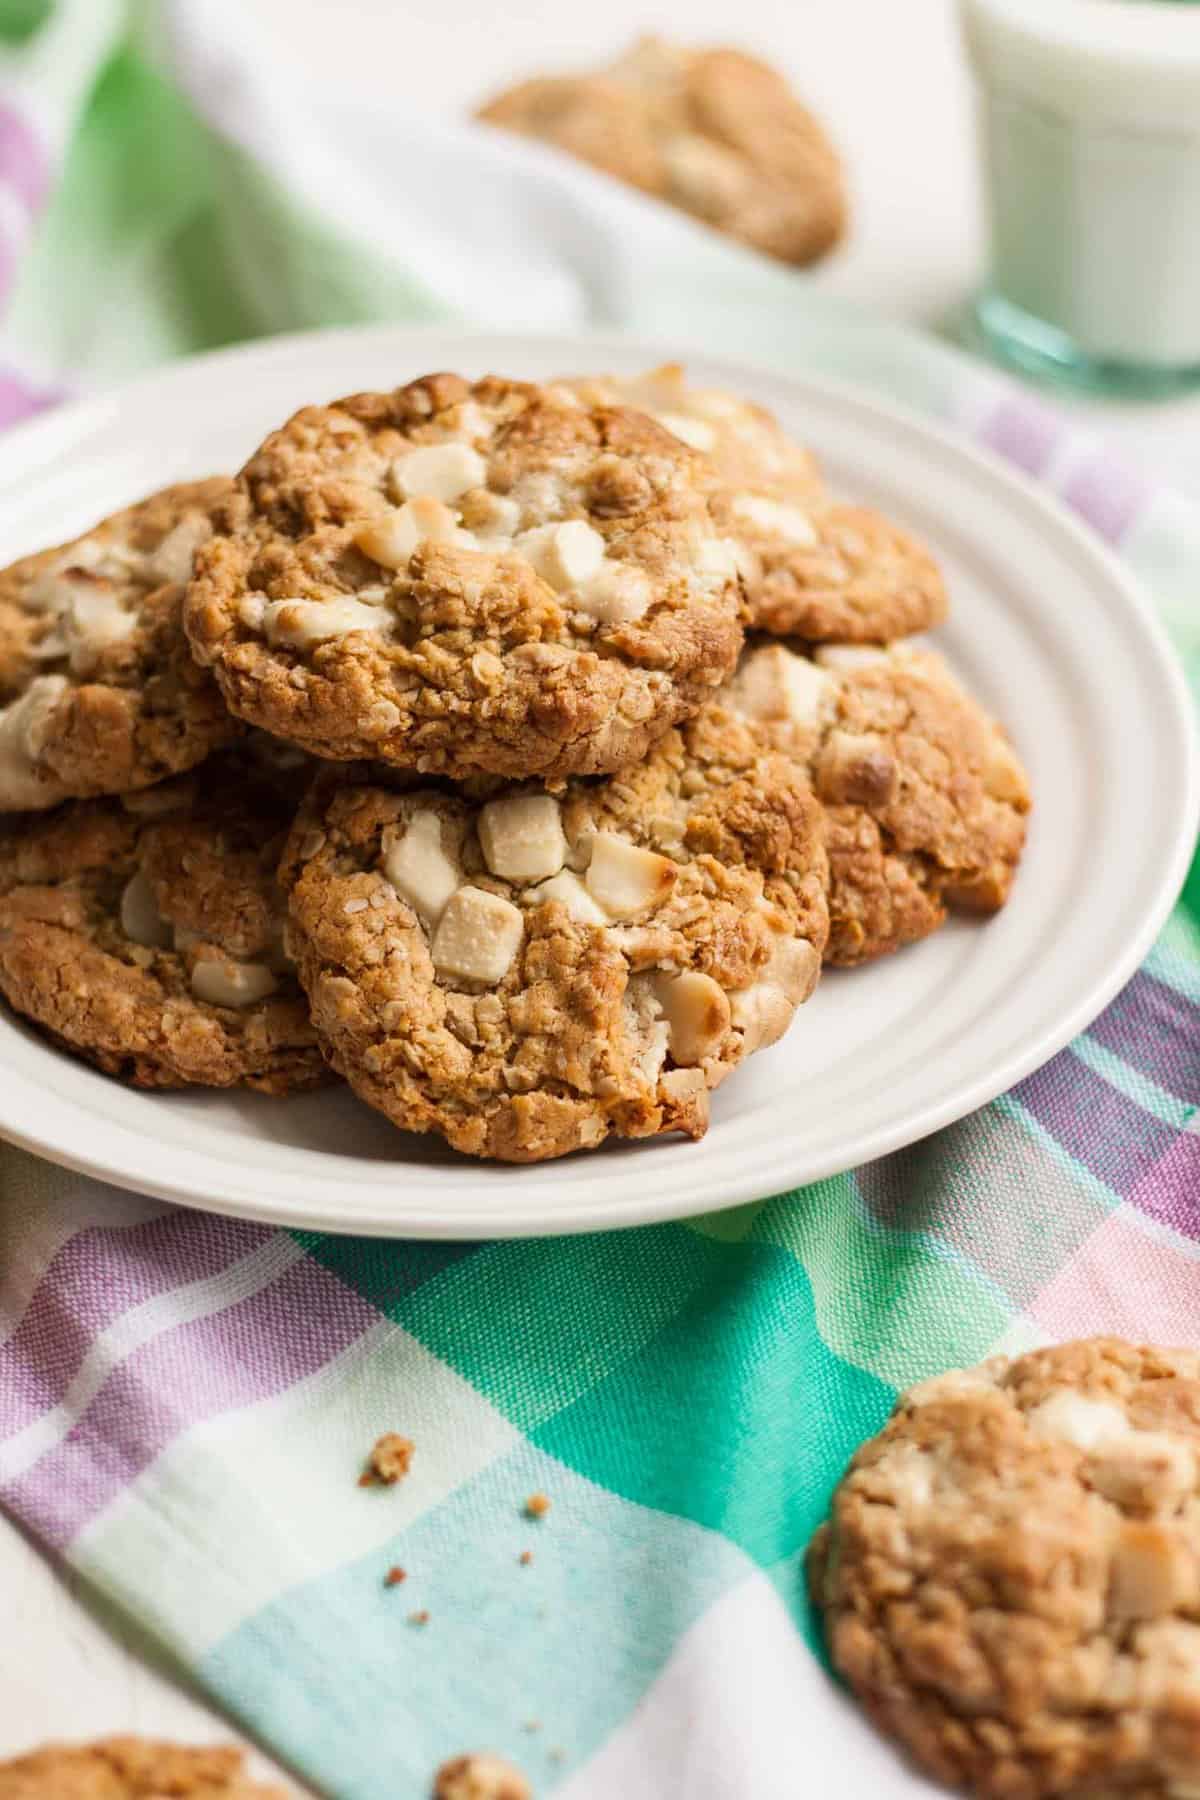 White Chocolate and Macadamia Oatmeal Cookies - these chocolatey oatmeal cookies are both crunchy and chewy and are seriously easy to make! | eatloveeats.com